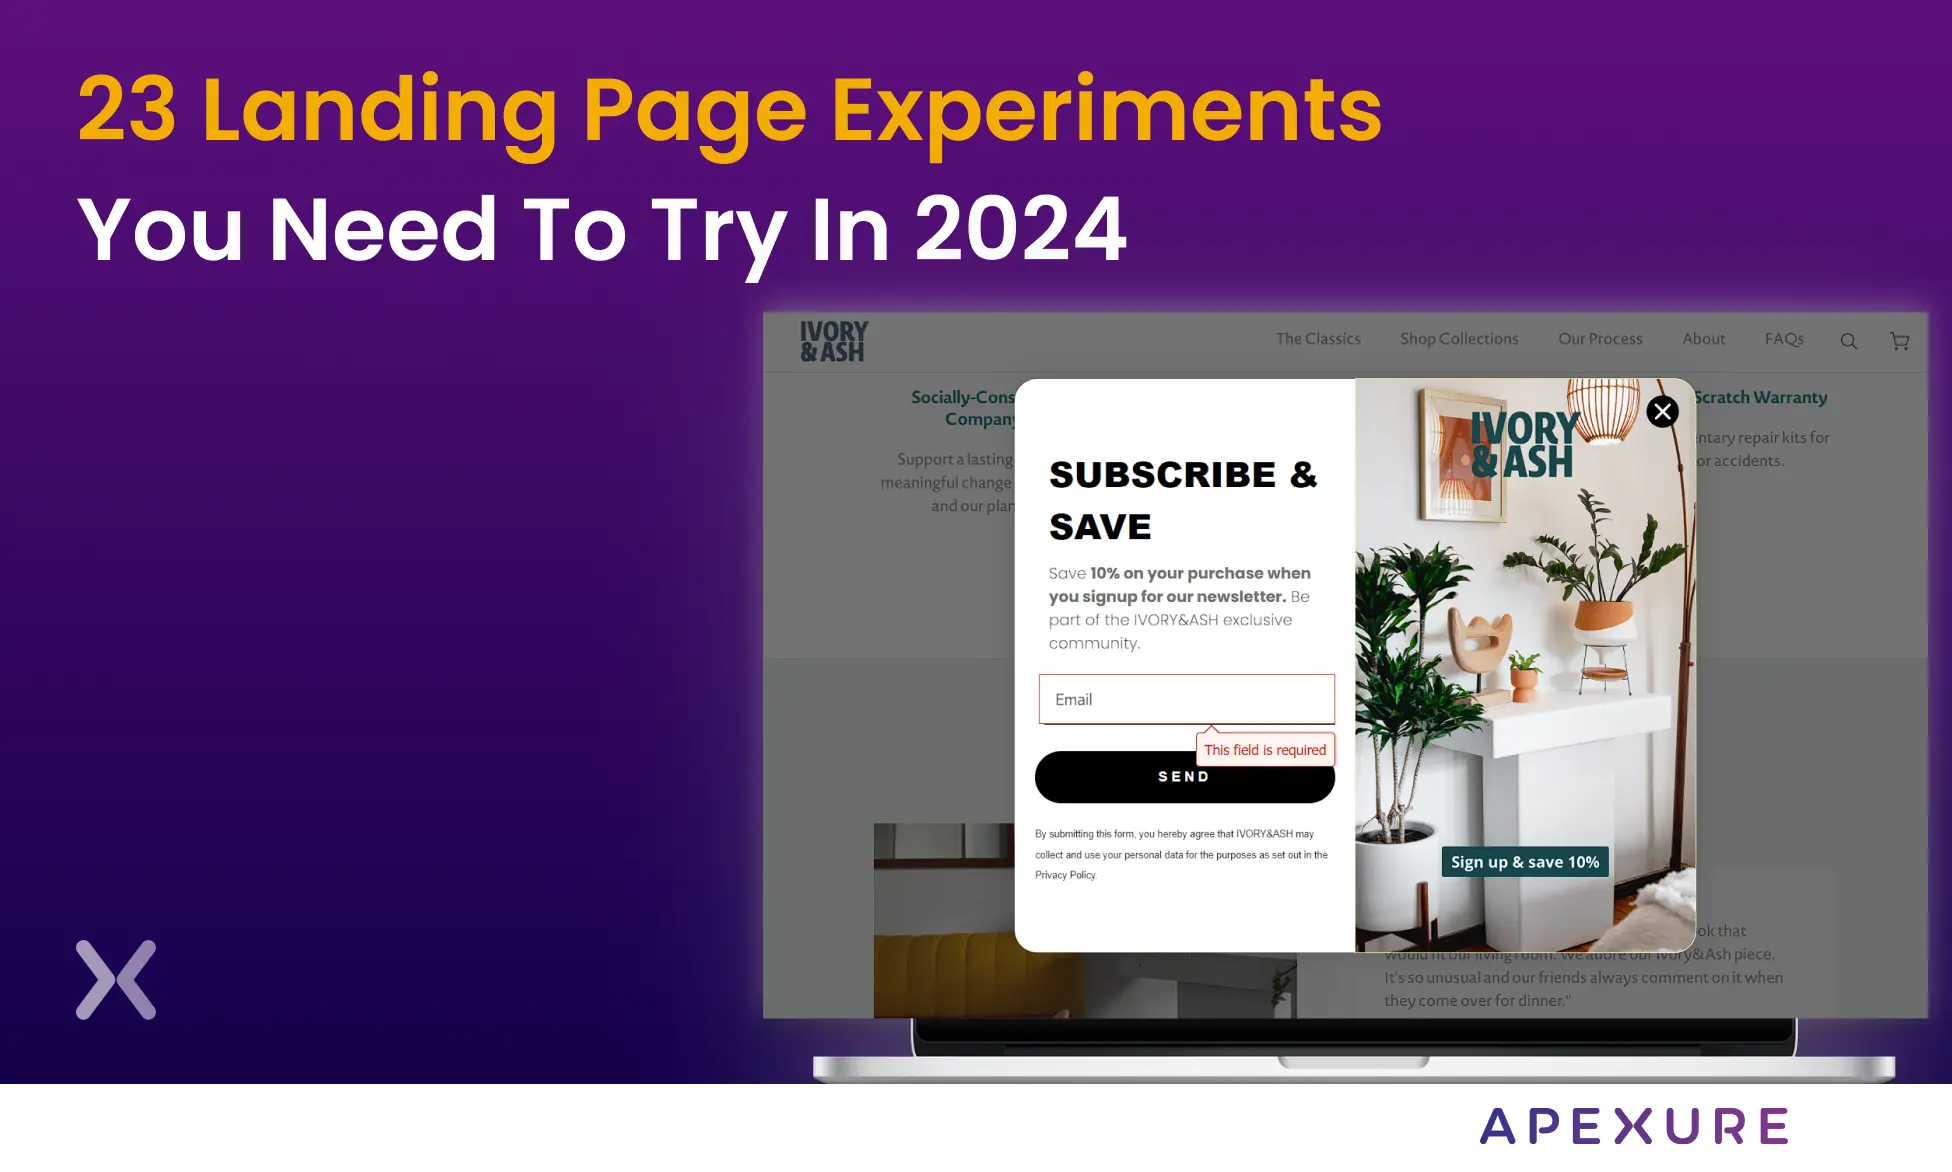 23 Landing Page Experiments You Need To Try In 2024